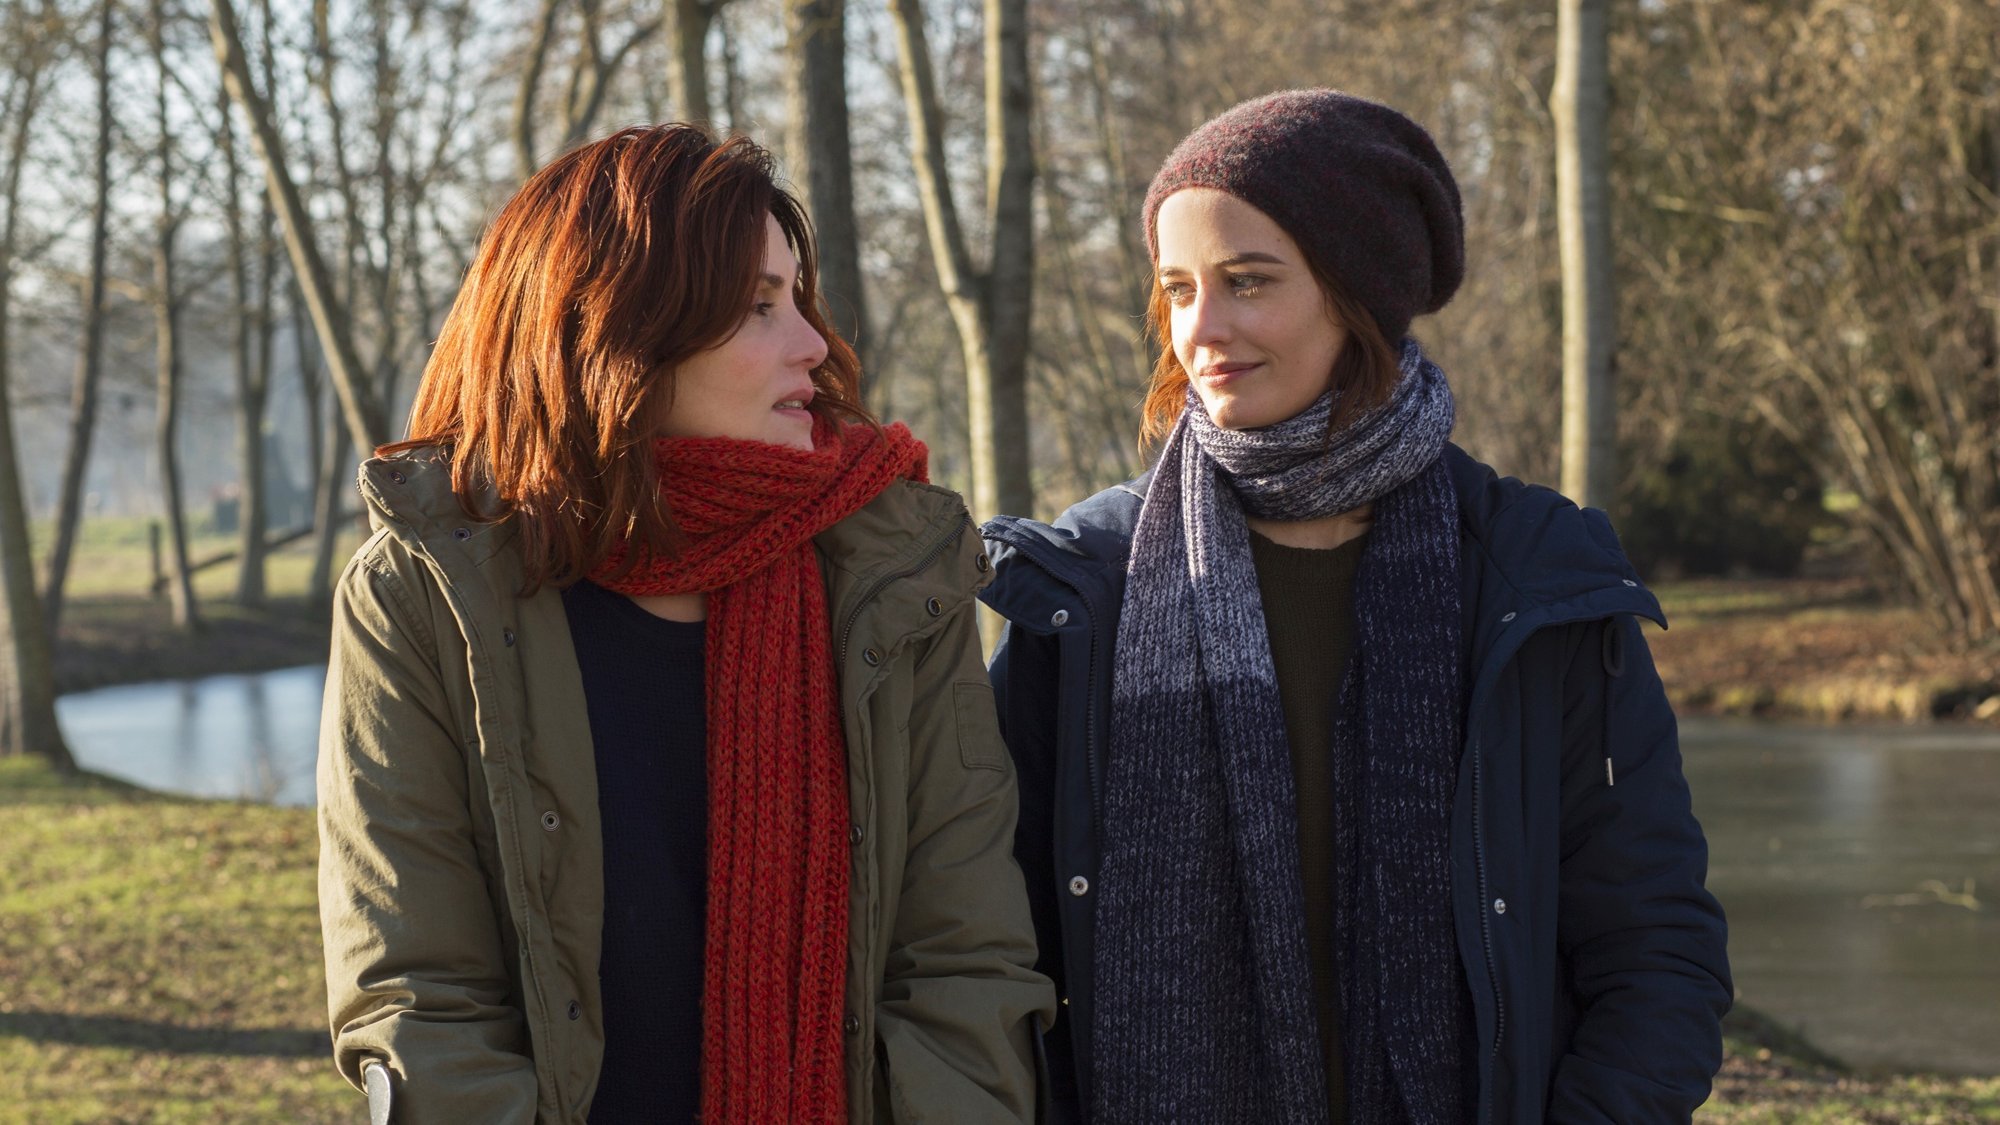 Emmanuelle Seigner stars as Delphine de Vigan and Eva Green stars as L. in Sony Pictures Classics' Based on a True Story (2017)